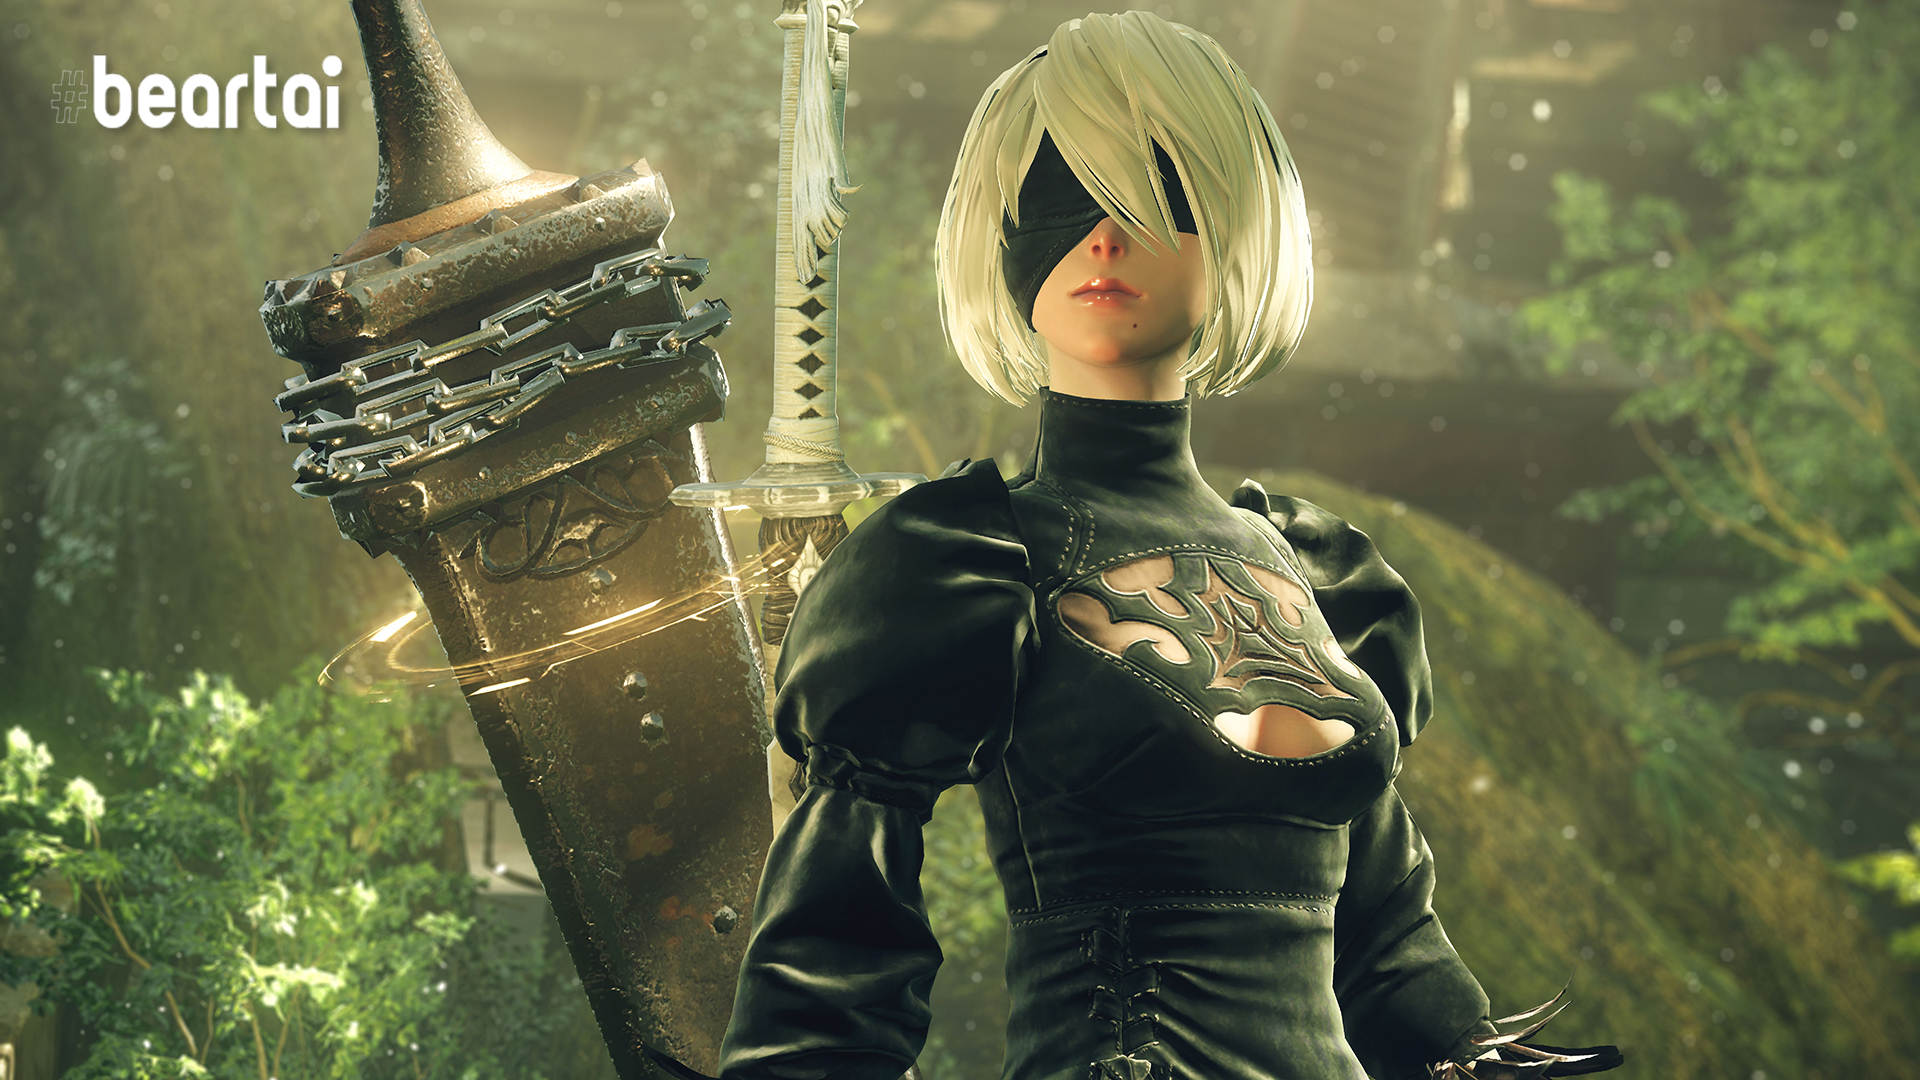 Lance McDonald discovers NieR's final secret: Automata nearly four years after release.